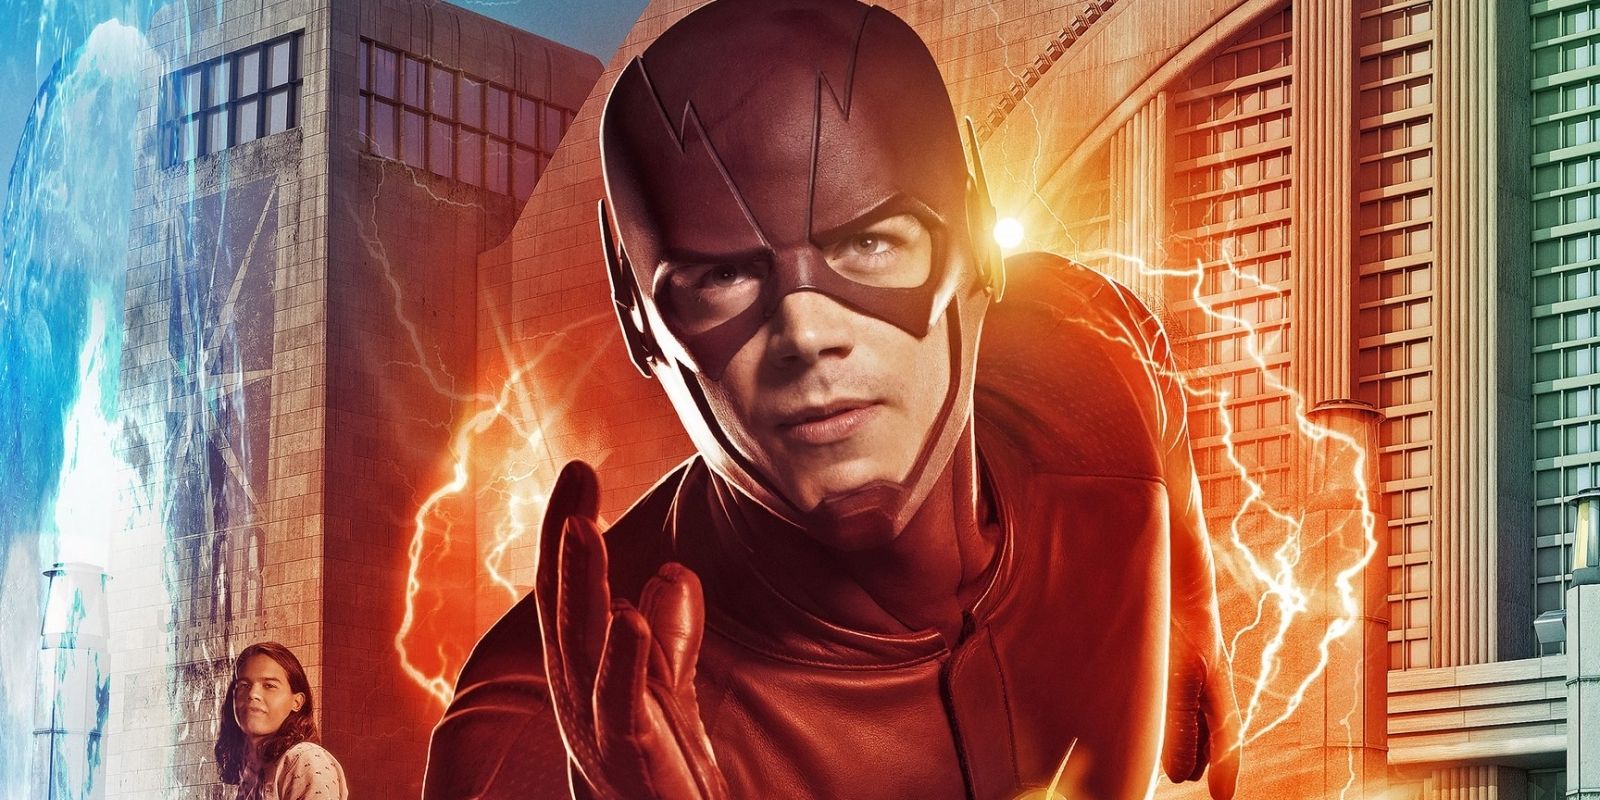 Things You Can't Out Run - Chapter 5 - ZpanSven - The Flash (TV